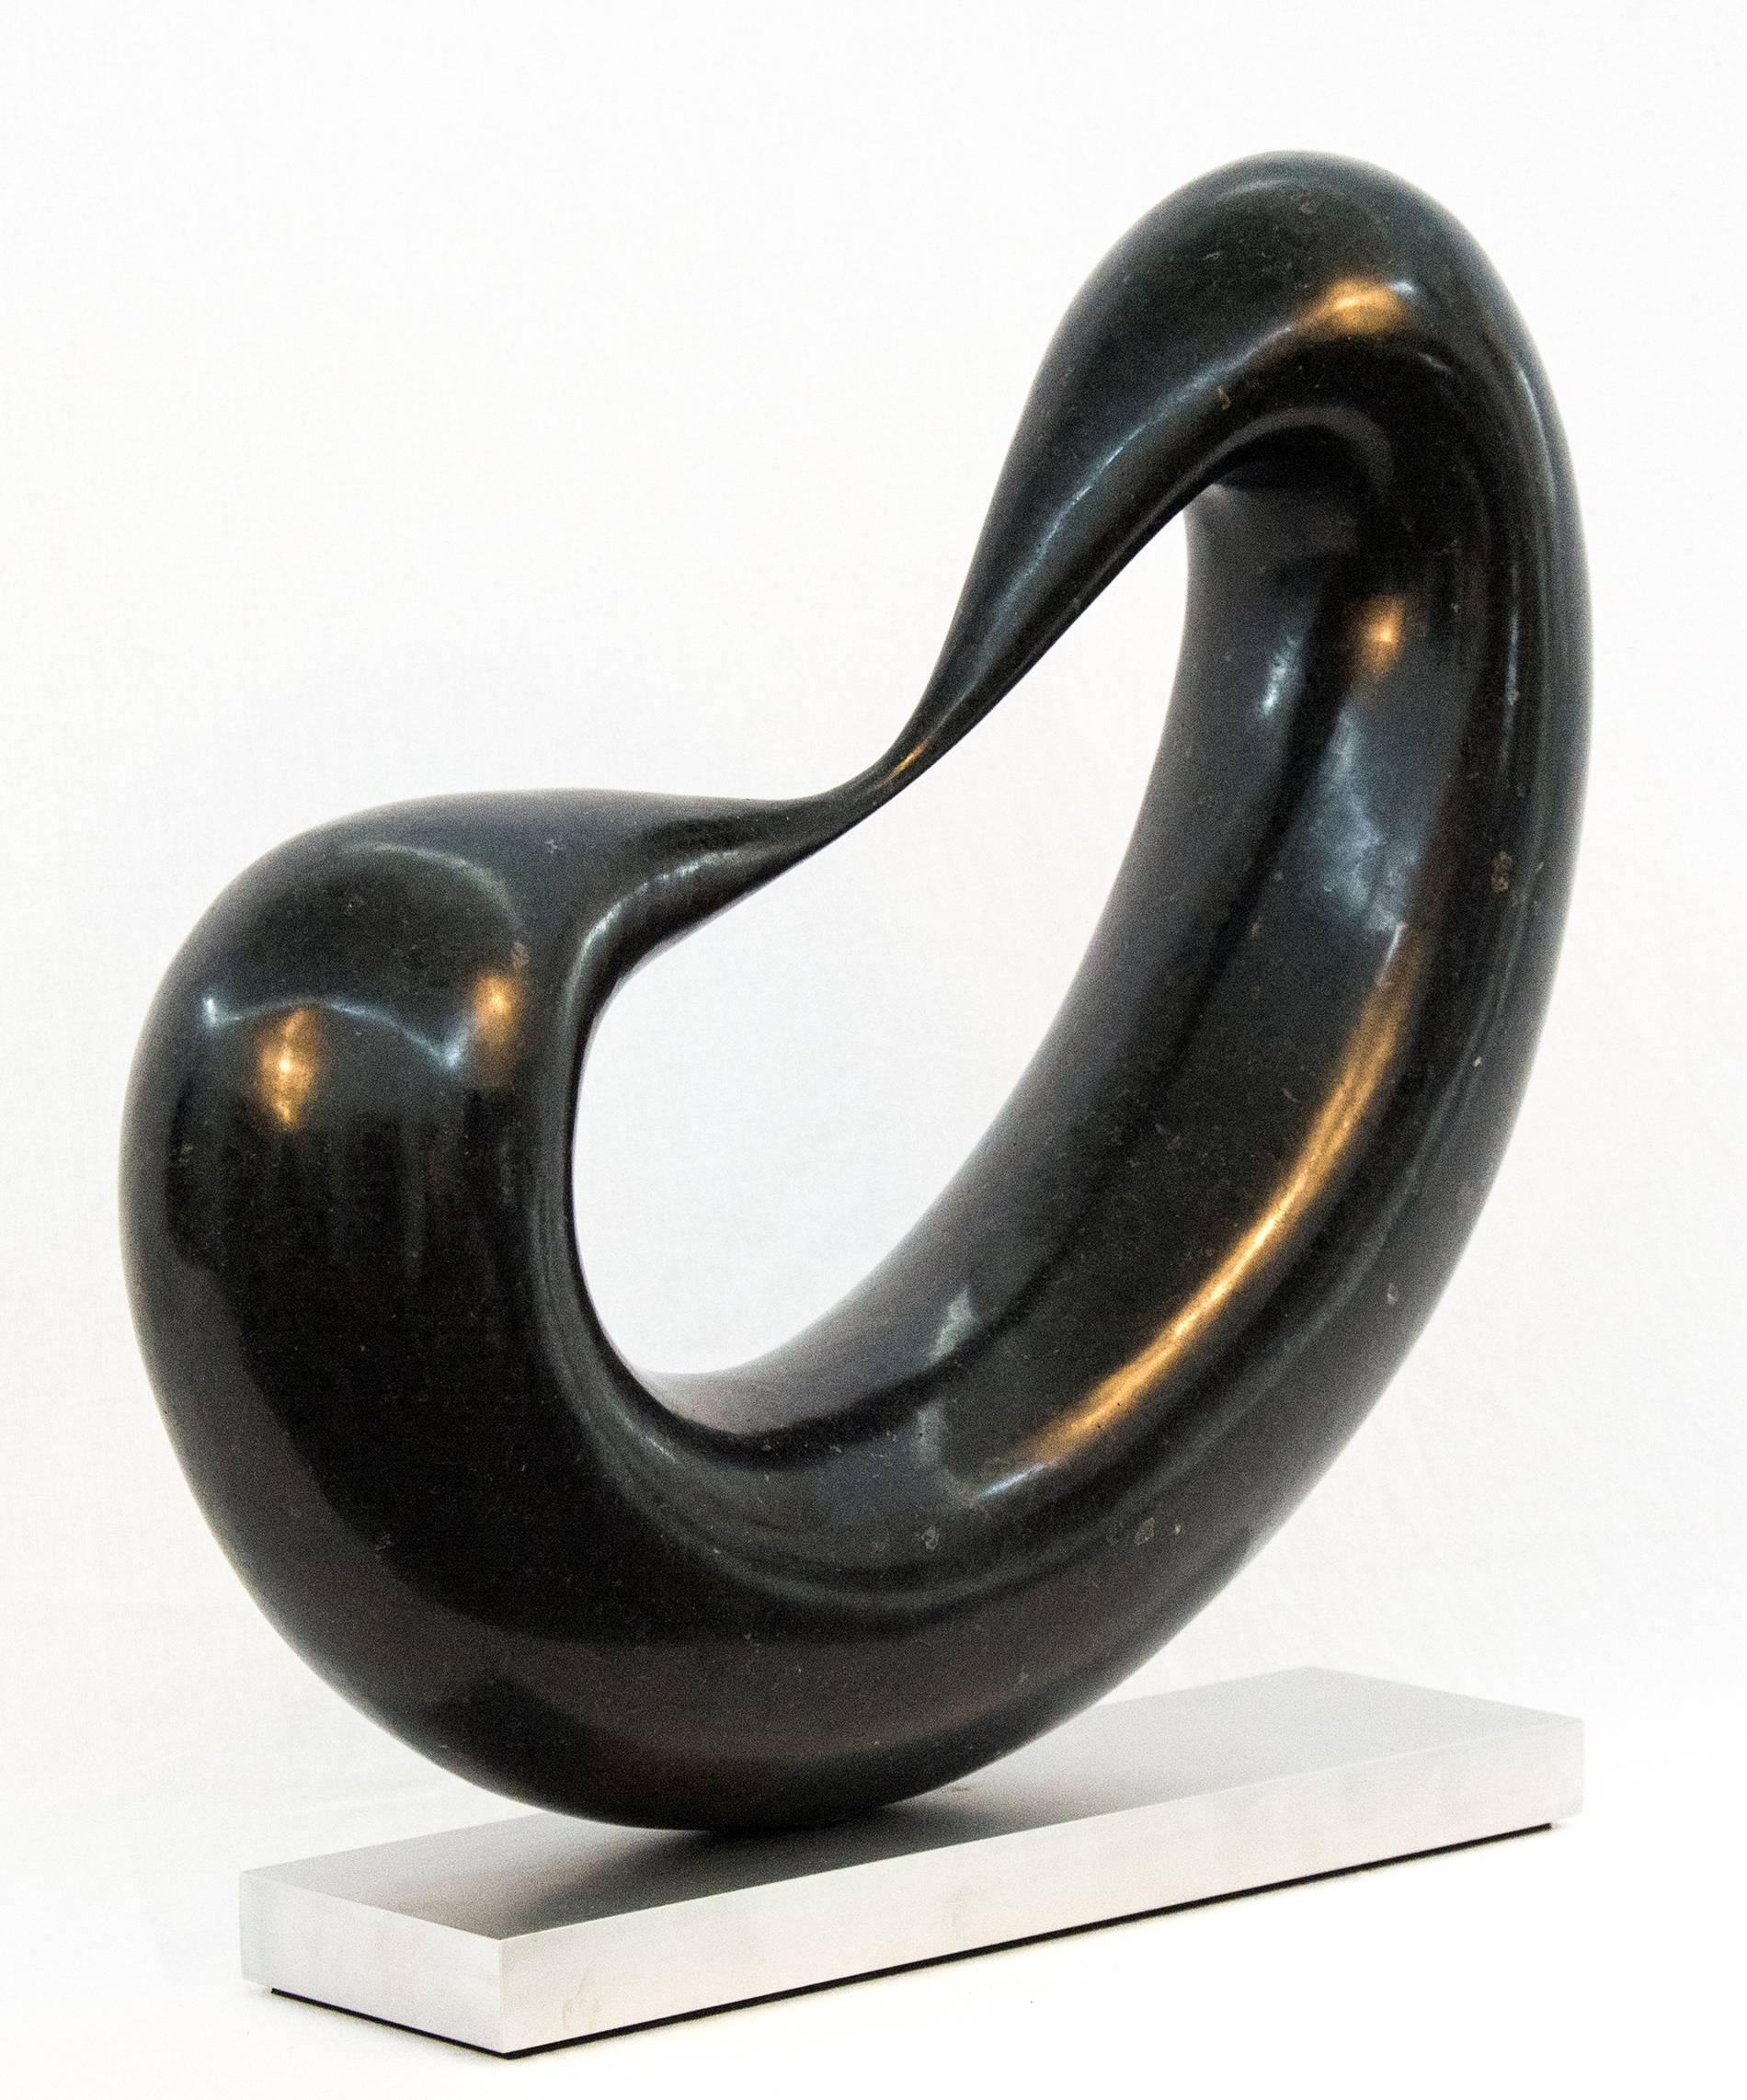 Smooth, black marble flecked with copper and white is engineered into a thick loop that is stretched thin on one side in this table top sculpture. Poised on a flat metal base, the flattened loop features a thinned portion after which the work is